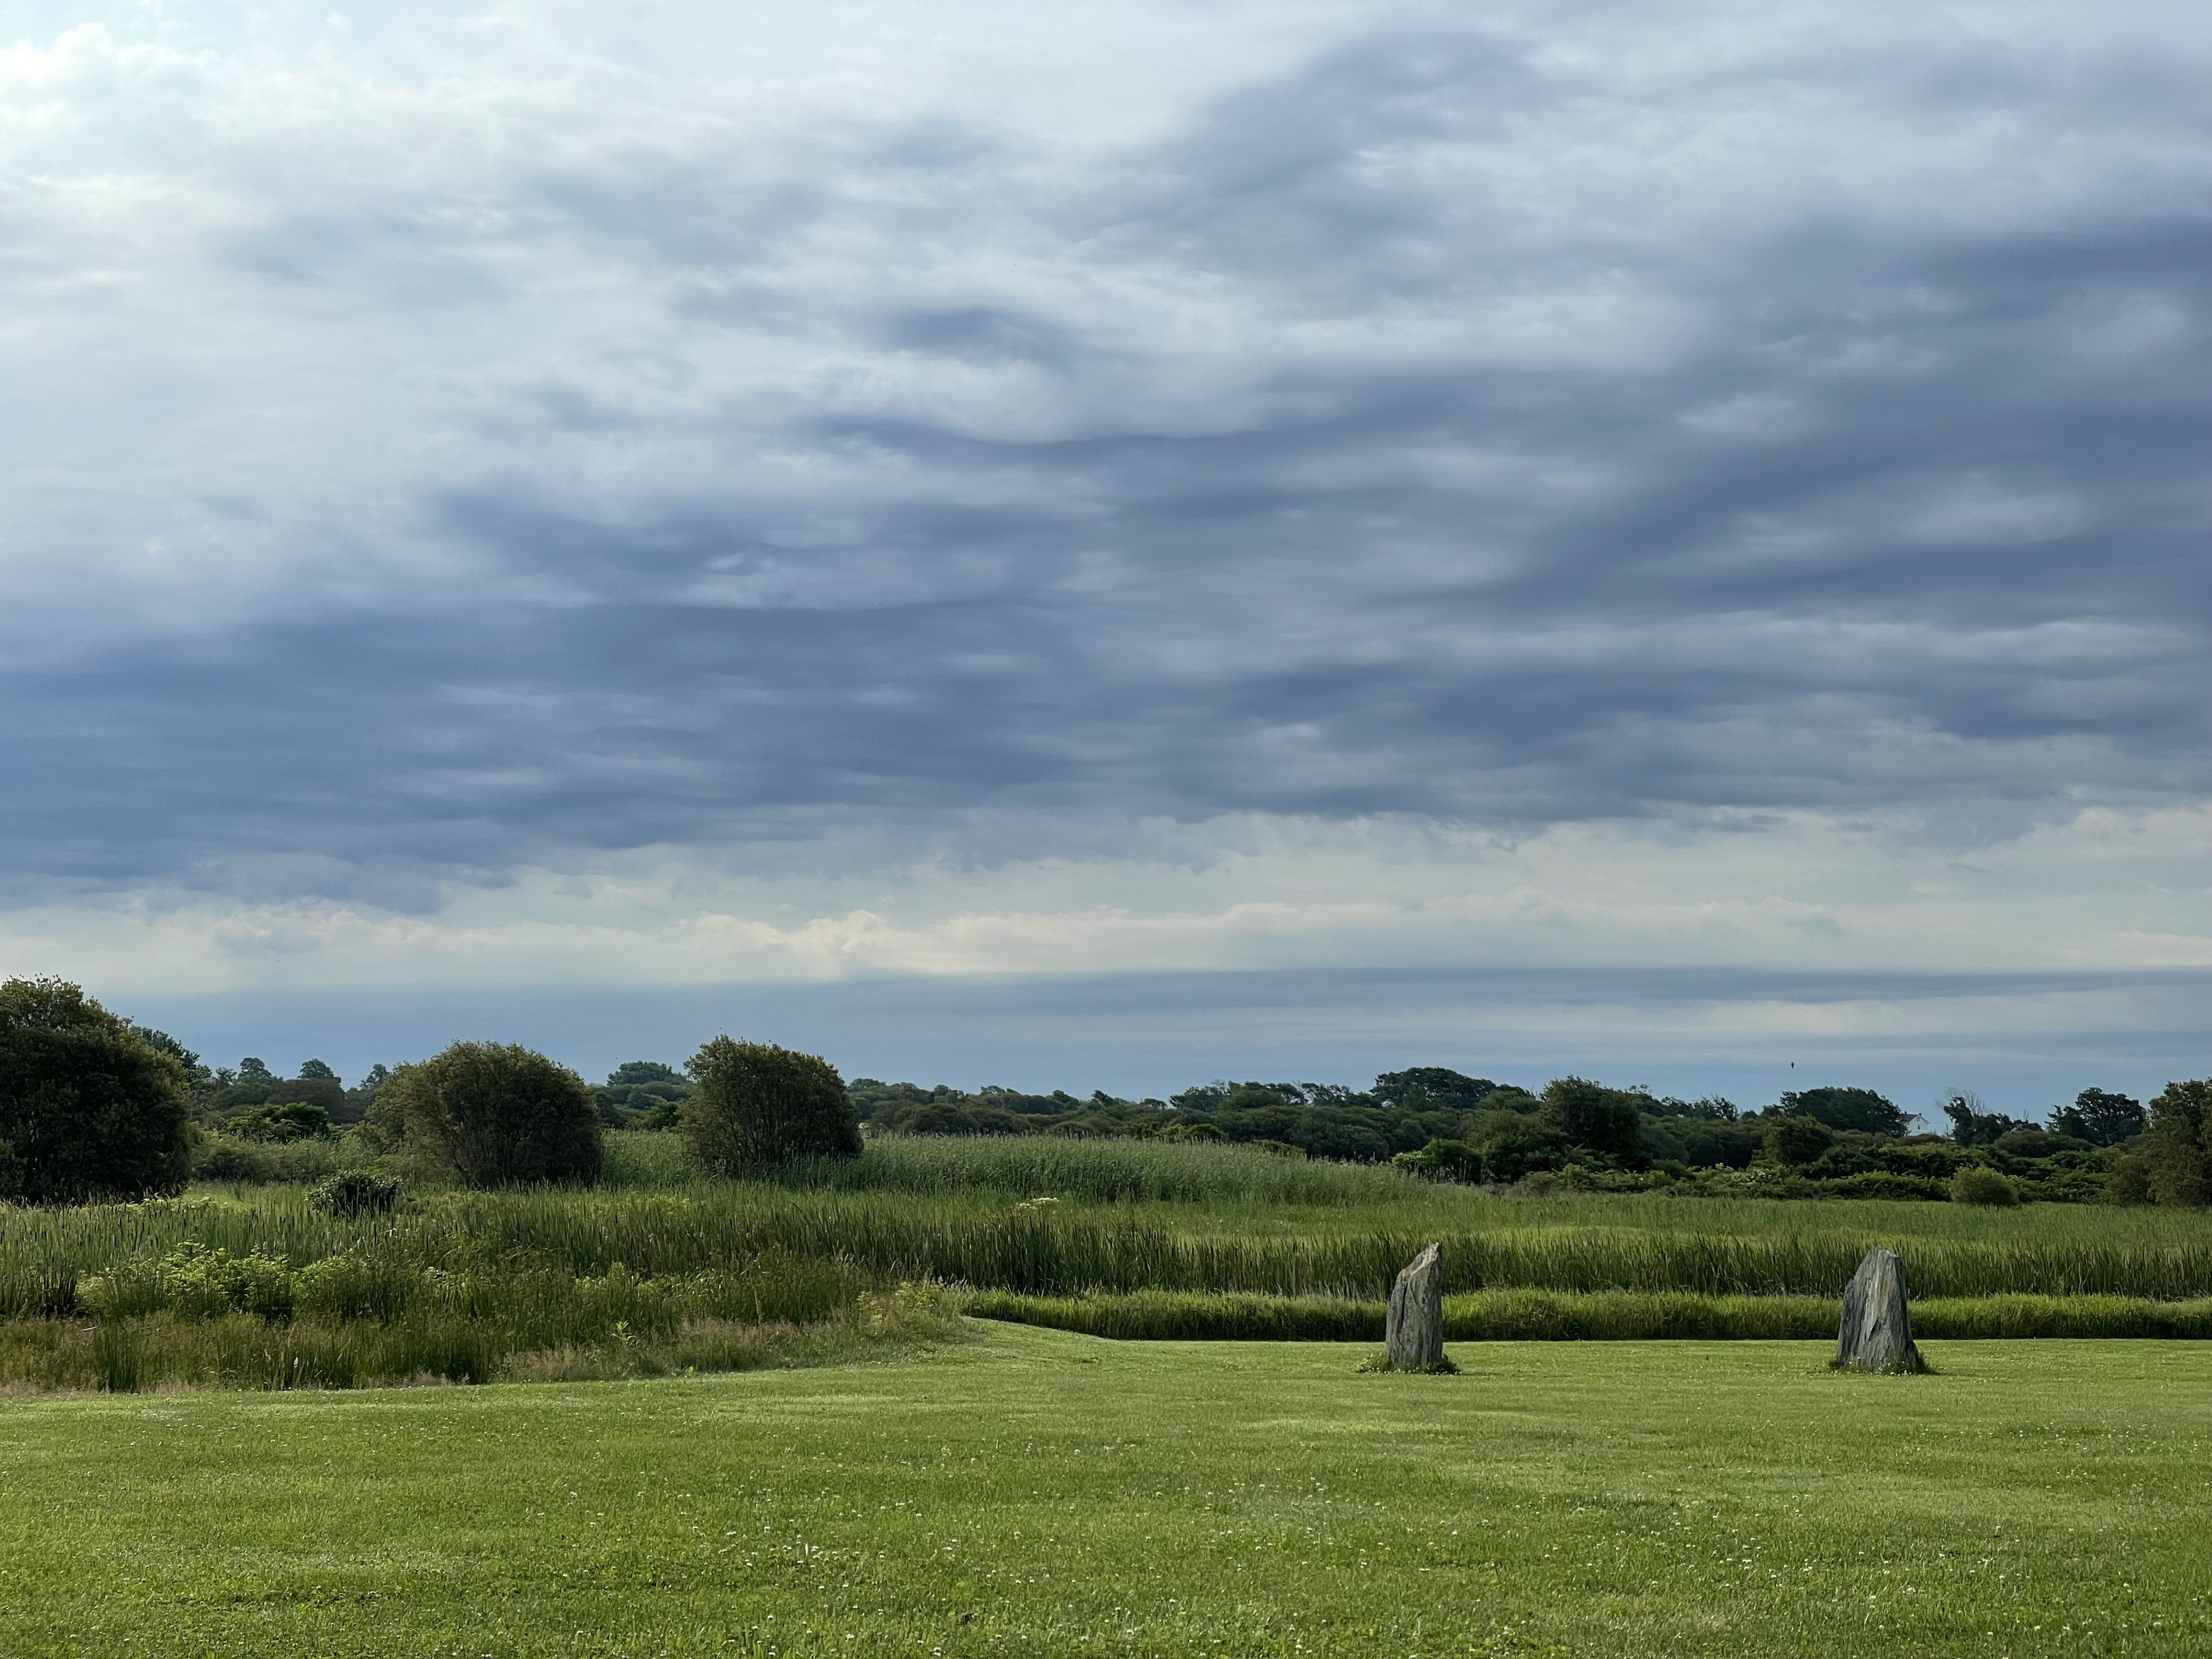 Two short stones form a kind of pair of pillars, standing alone in a field with trees behind them.  A cloudy sky looms overhead